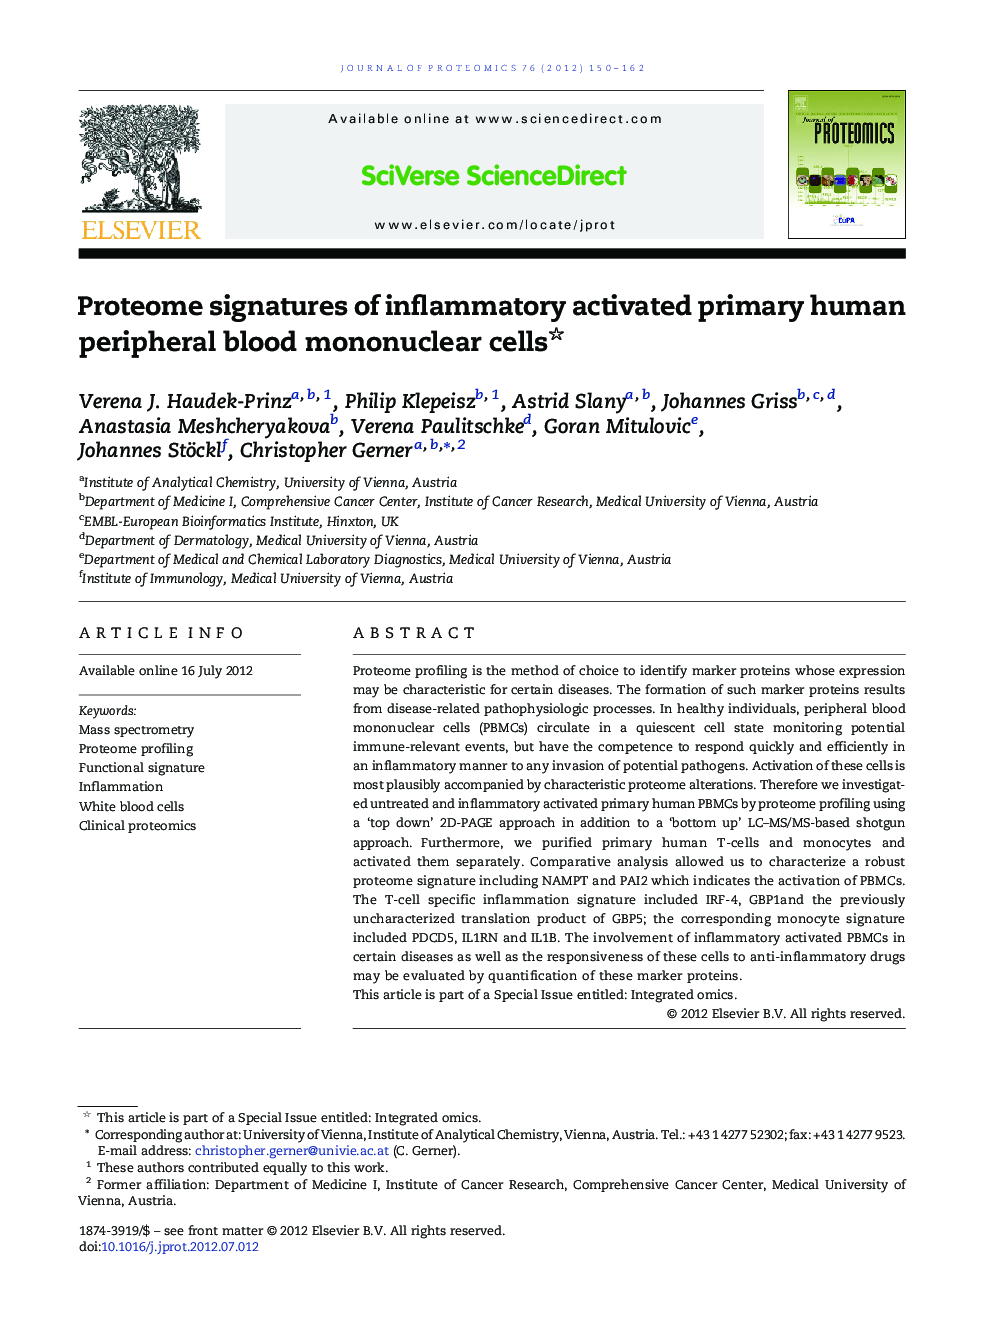 Proteome signatures of inflammatory activated primary human peripheral blood mononuclear cells